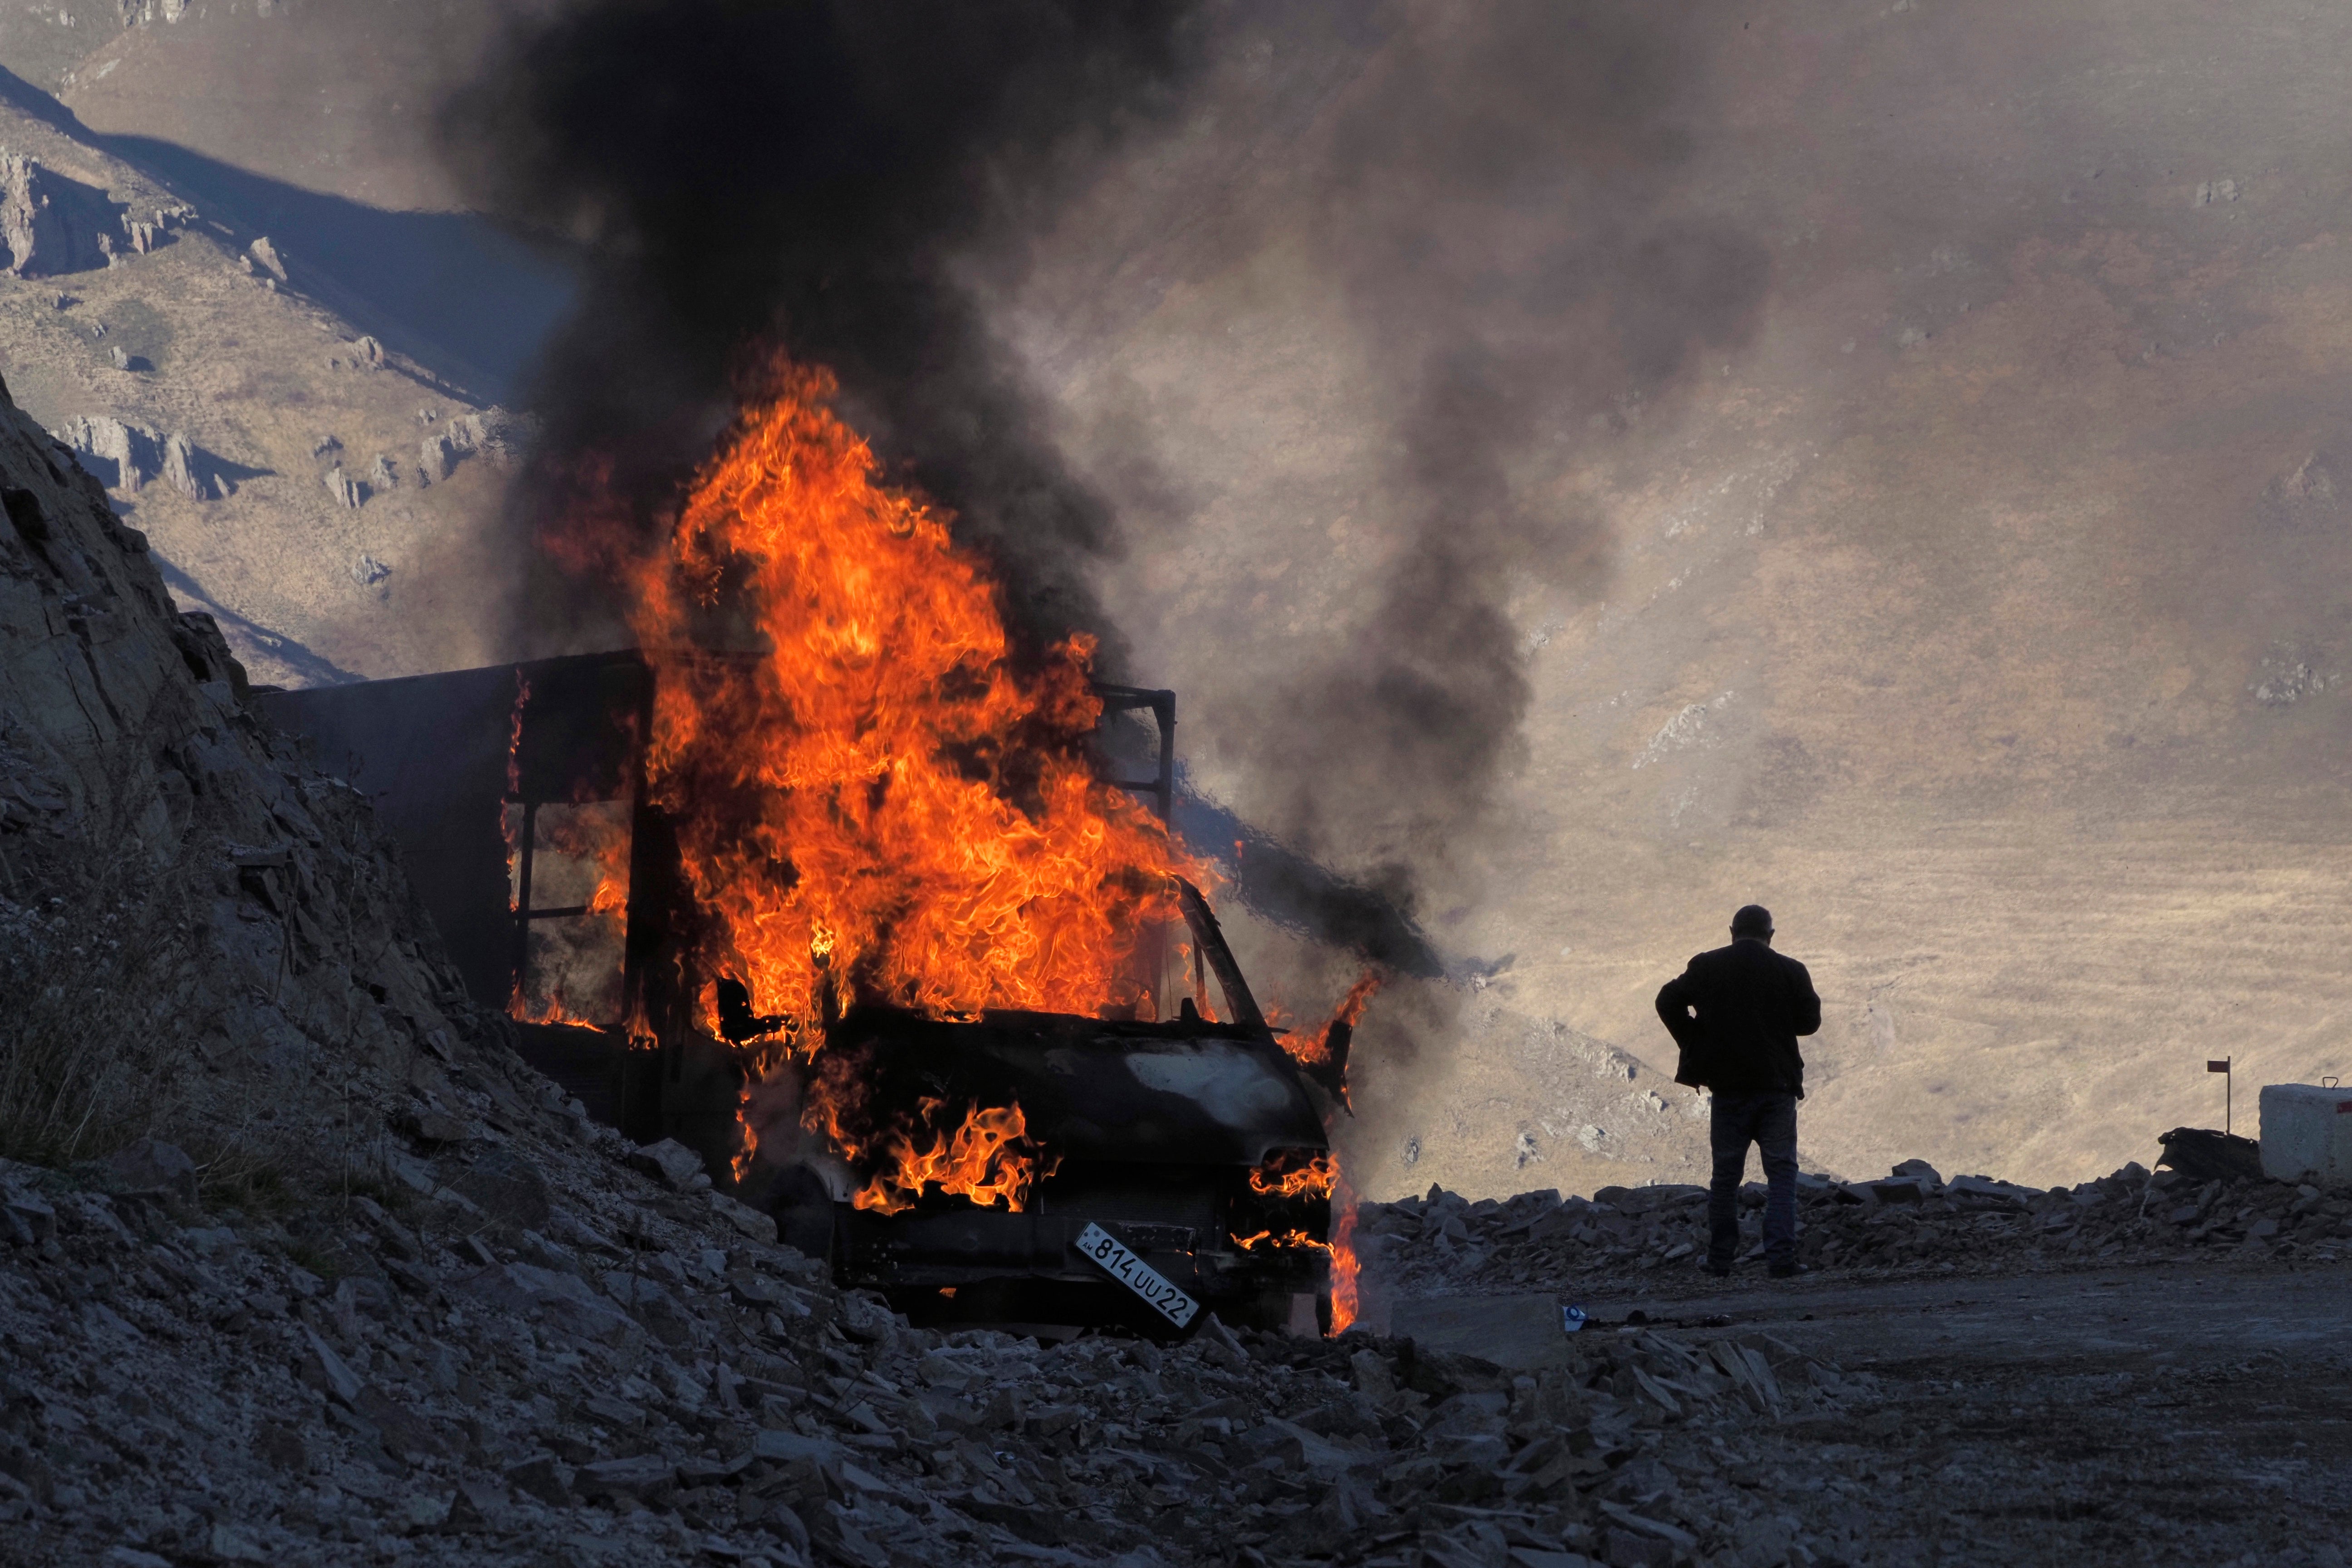 A man stands near his burning car which caught on fire along the road to a mountain pass, near the border between Nagorno-Karabakh and Armenia